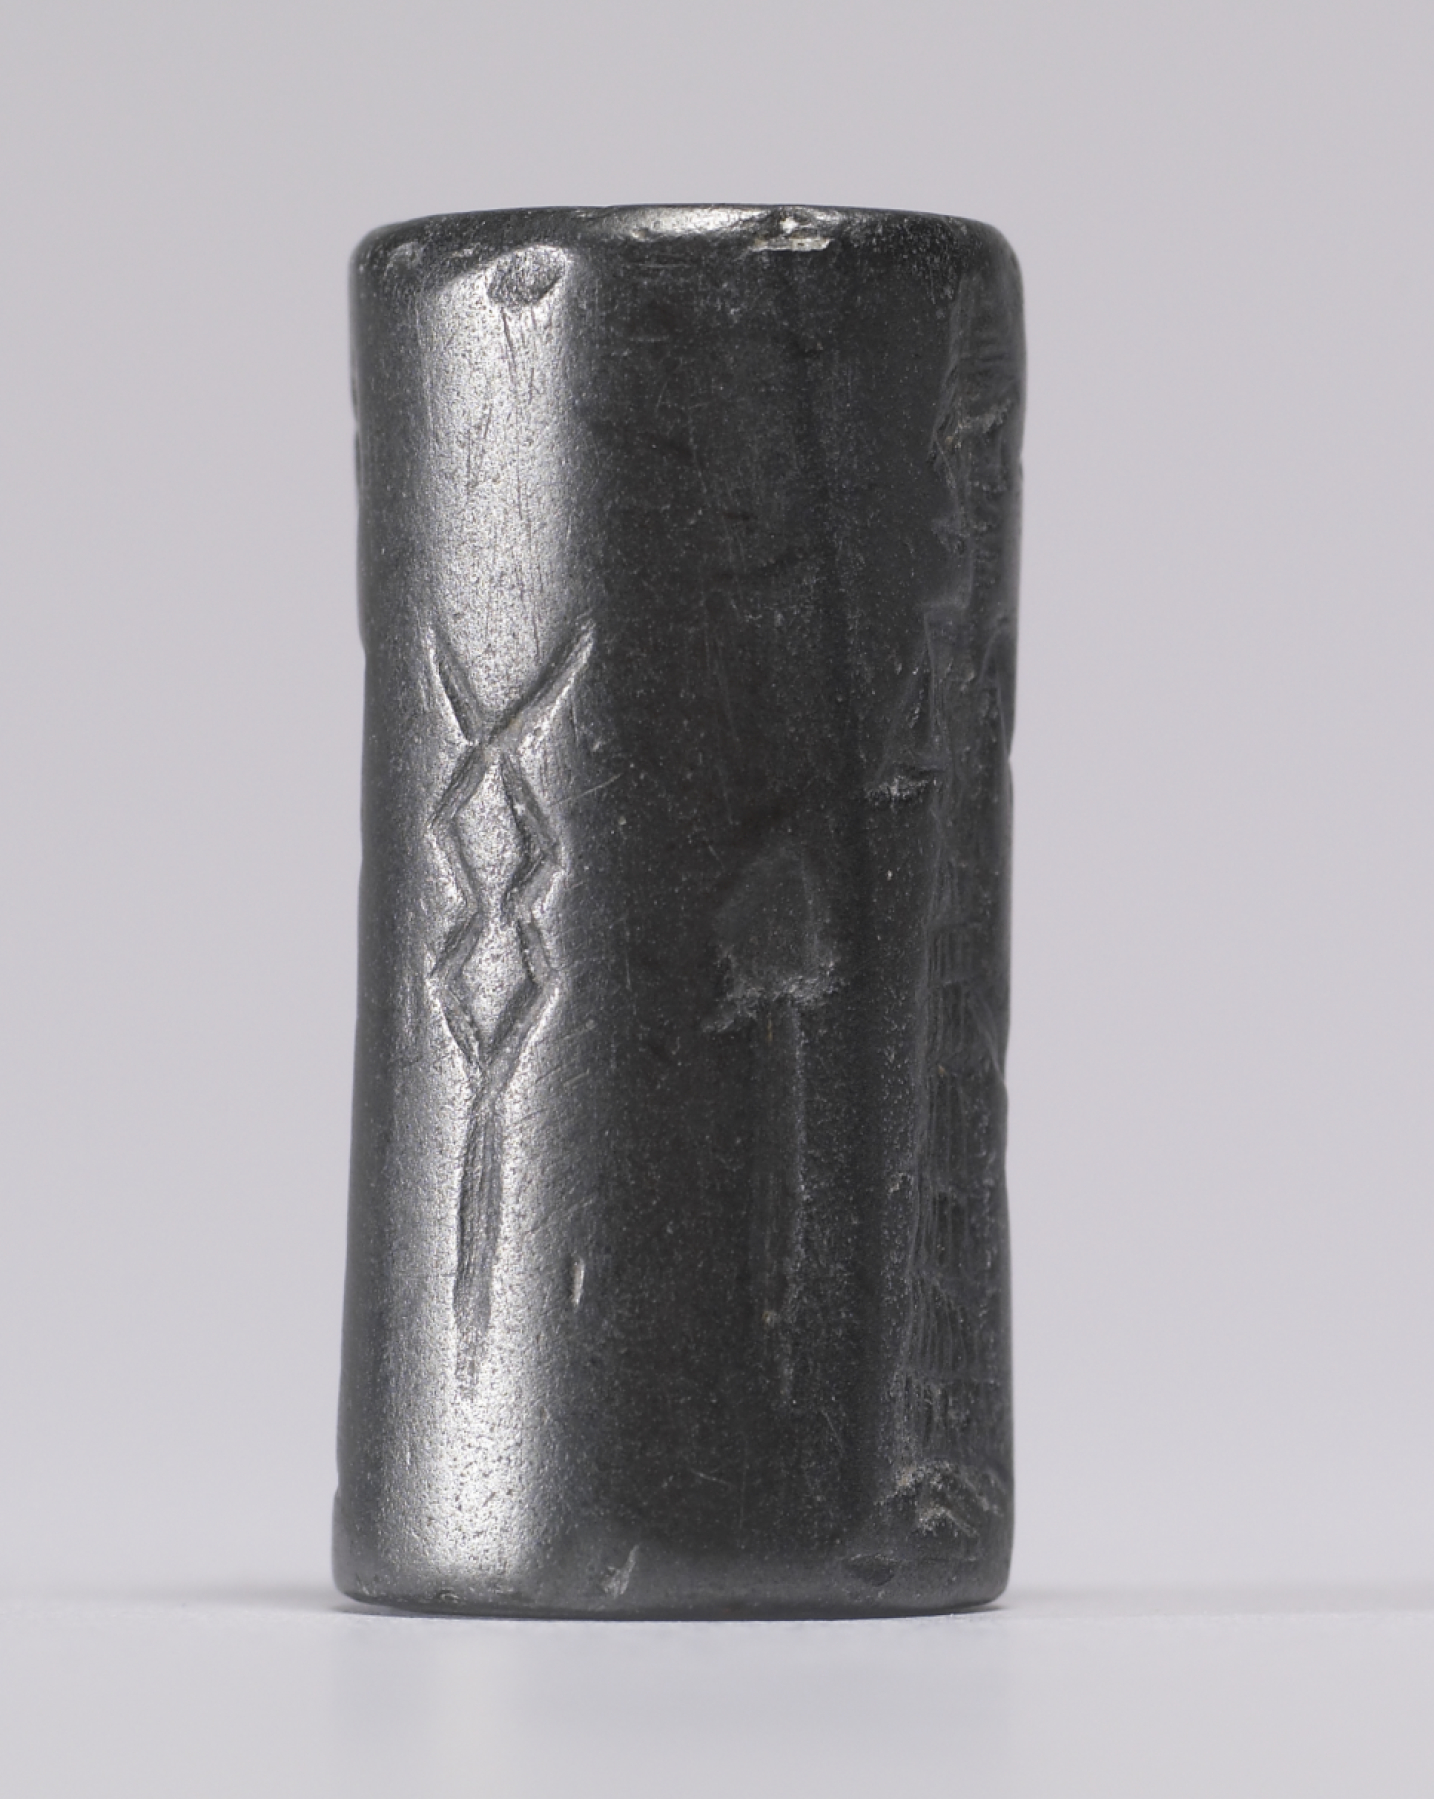 Image for Cylinder Seal with Standing Figures and an Inscription